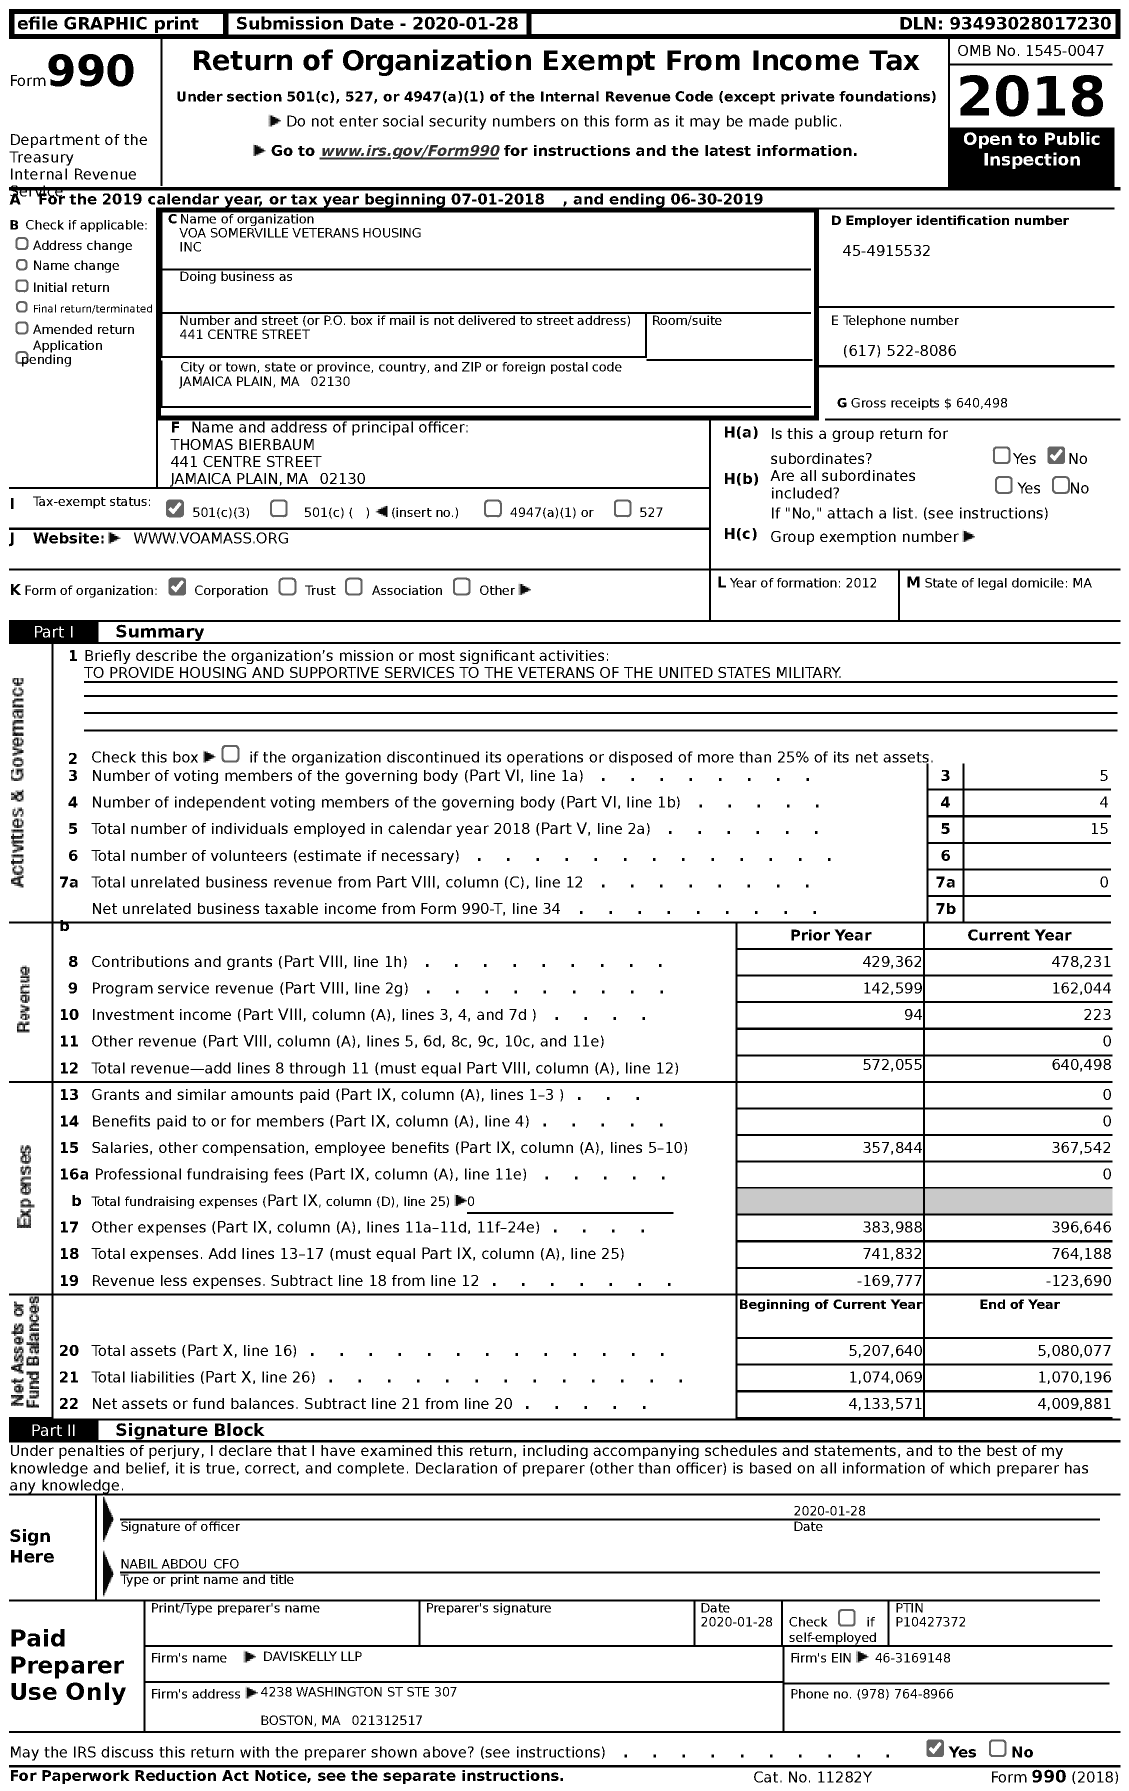 Image of first page of 2018 Form 990 for Volunteers of America - VOA Somerville Veterans Housing